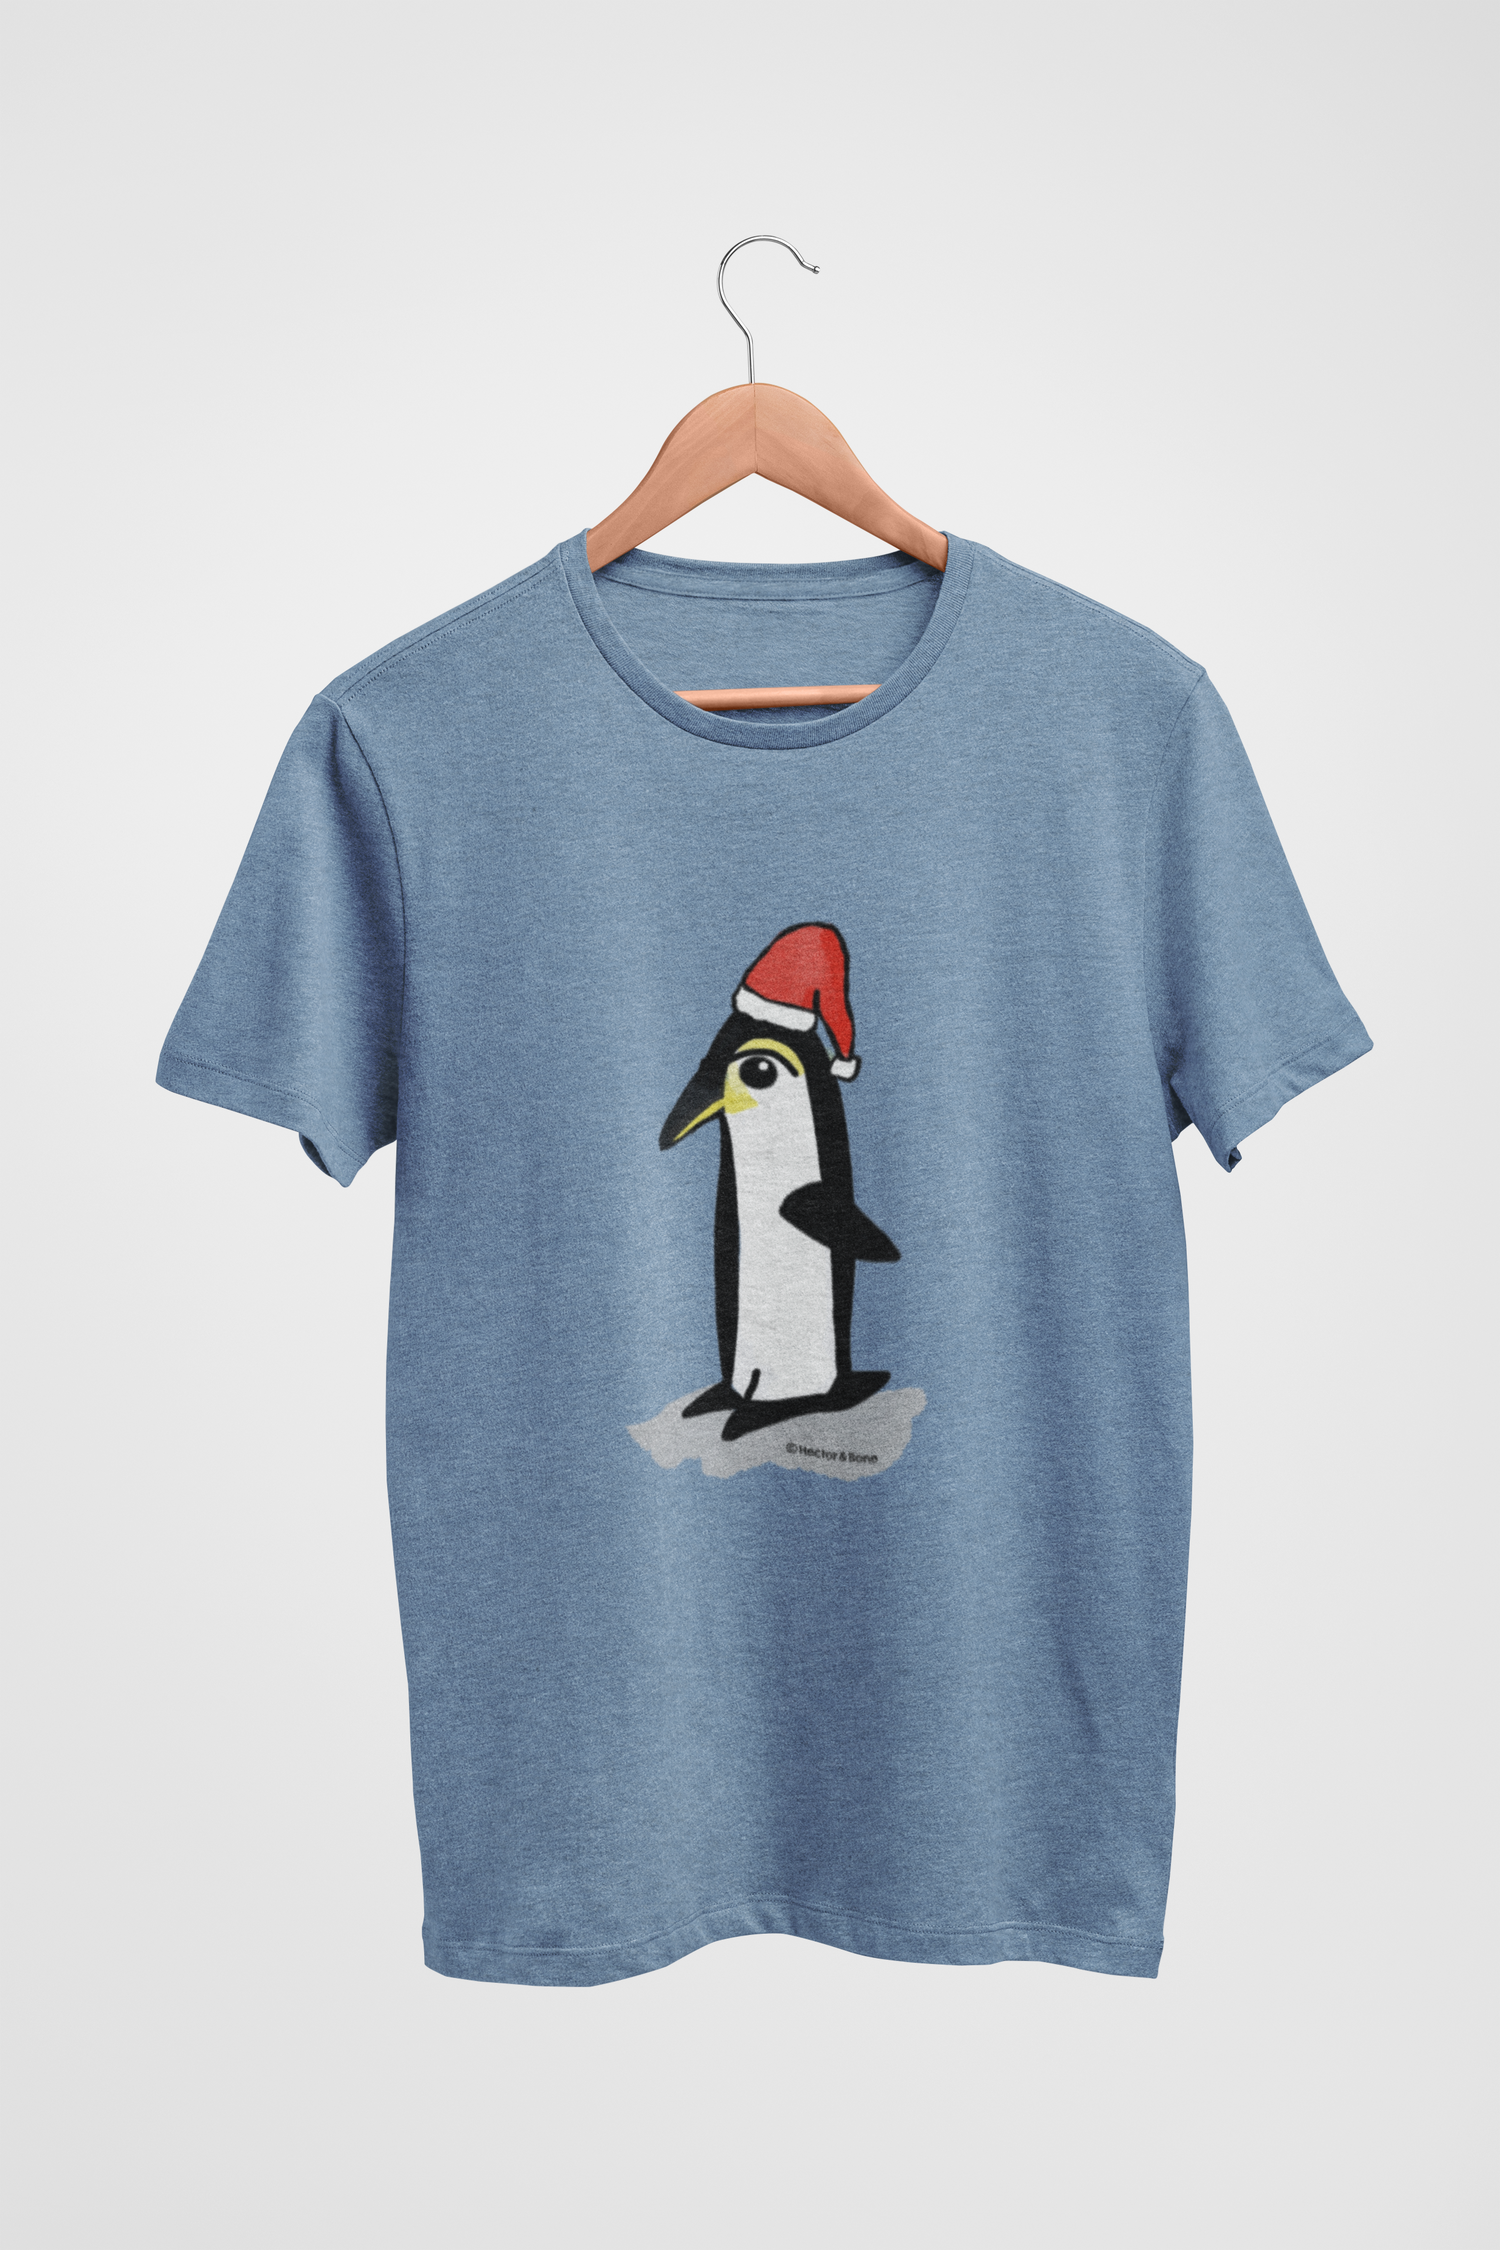 Santa Penguin Christmas T-shirt - Illustrated cute penguin on mid heather blue colour vegan cotton t-shirt by Hector and Bone